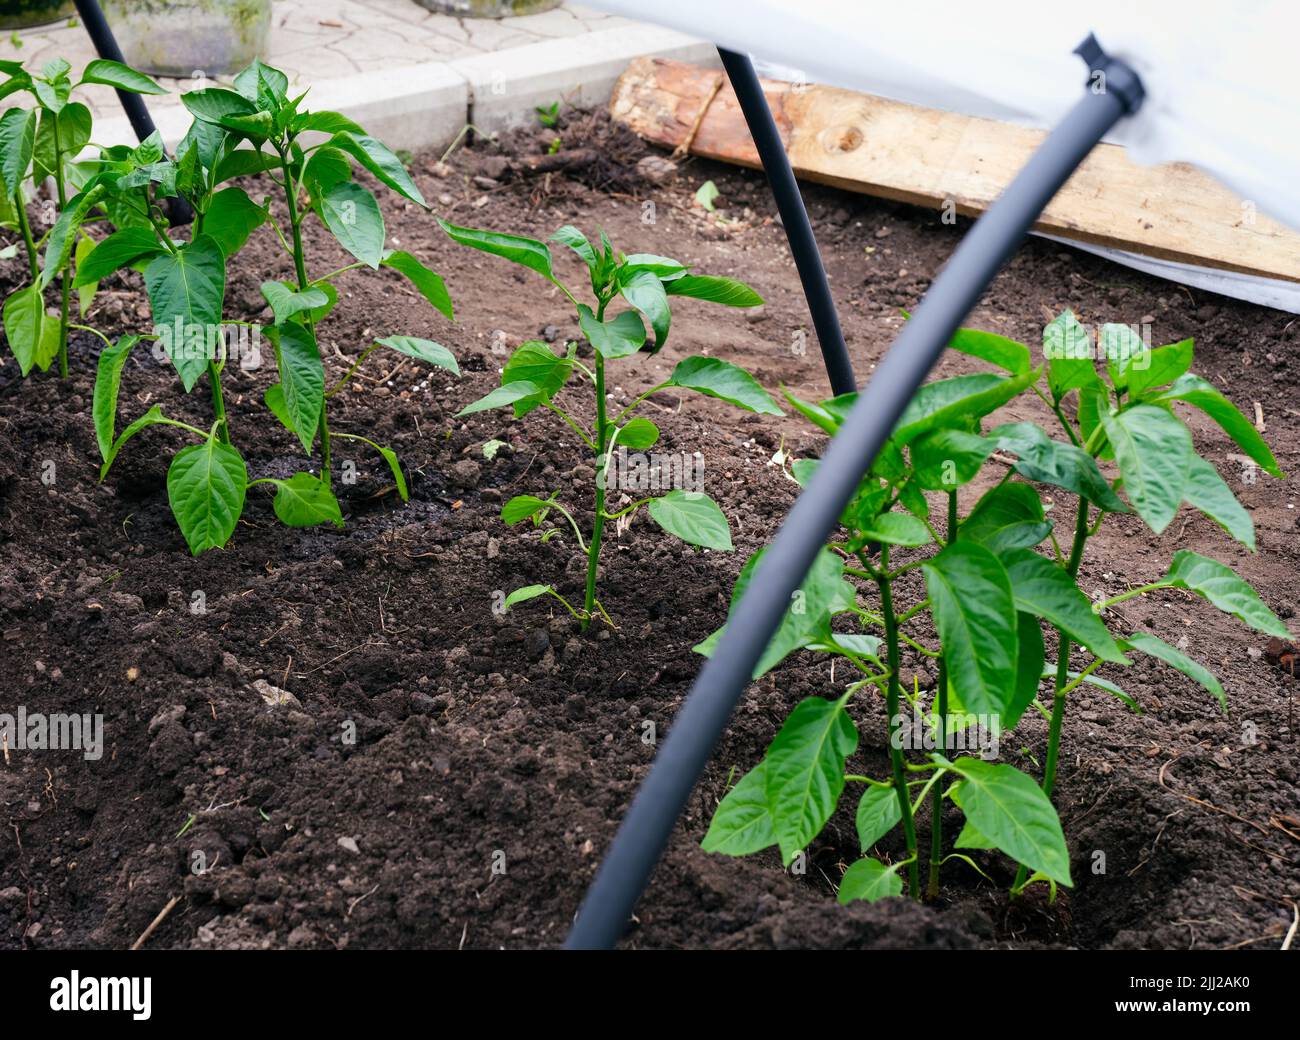 Pepper plants growing in a small greenhouse Stock Photo